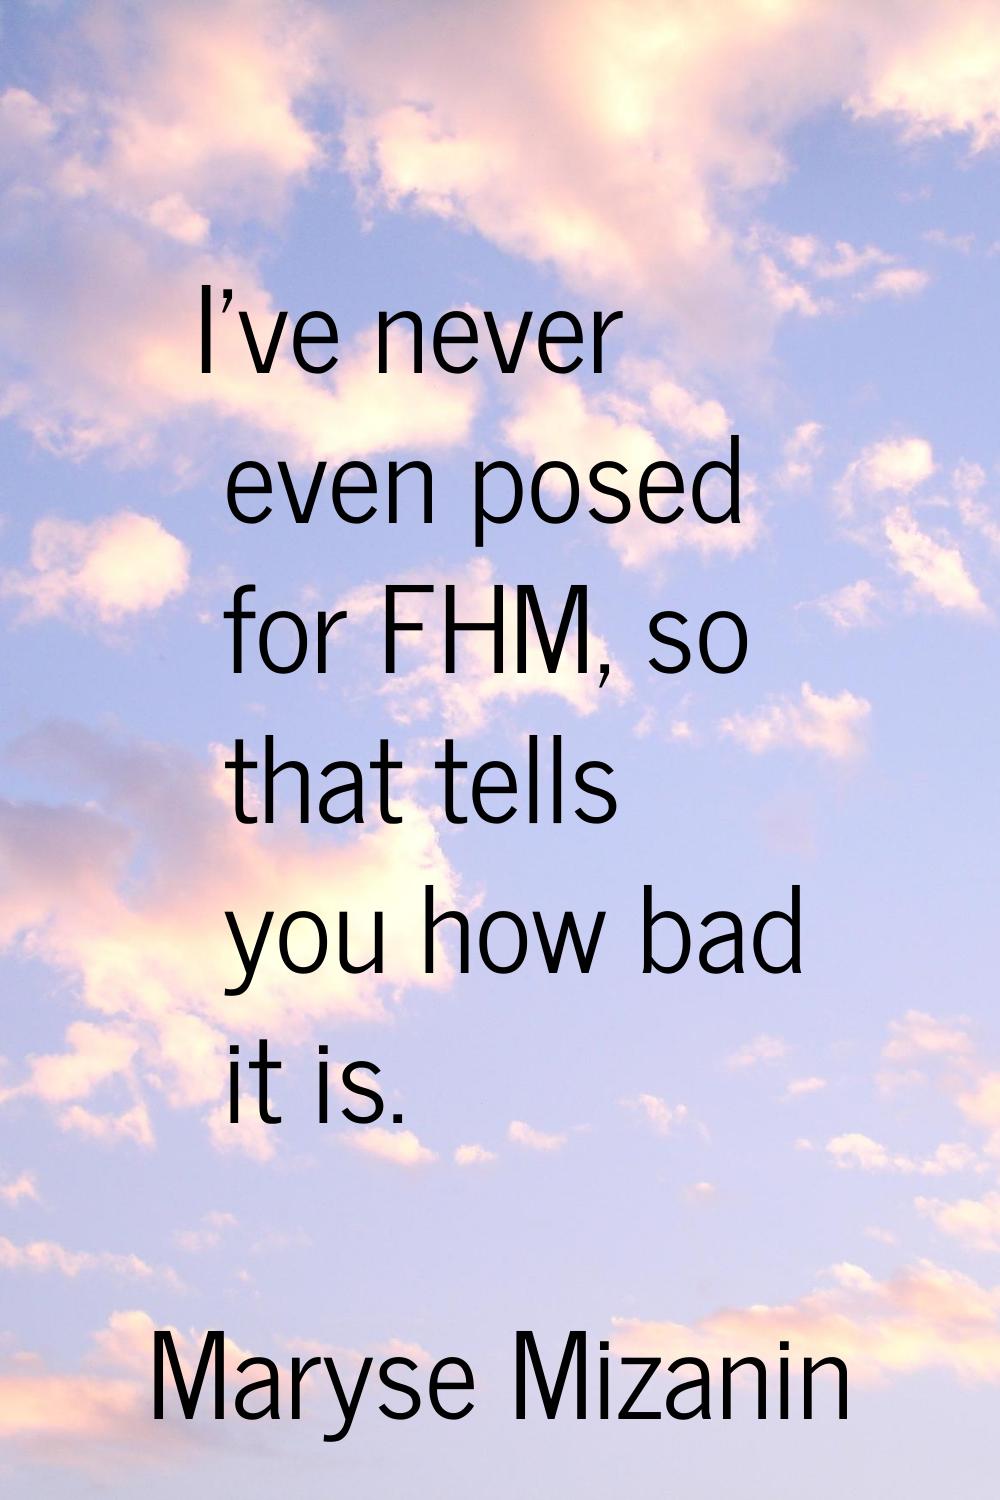 I've never even posed for FHM, so that tells you how bad it is.